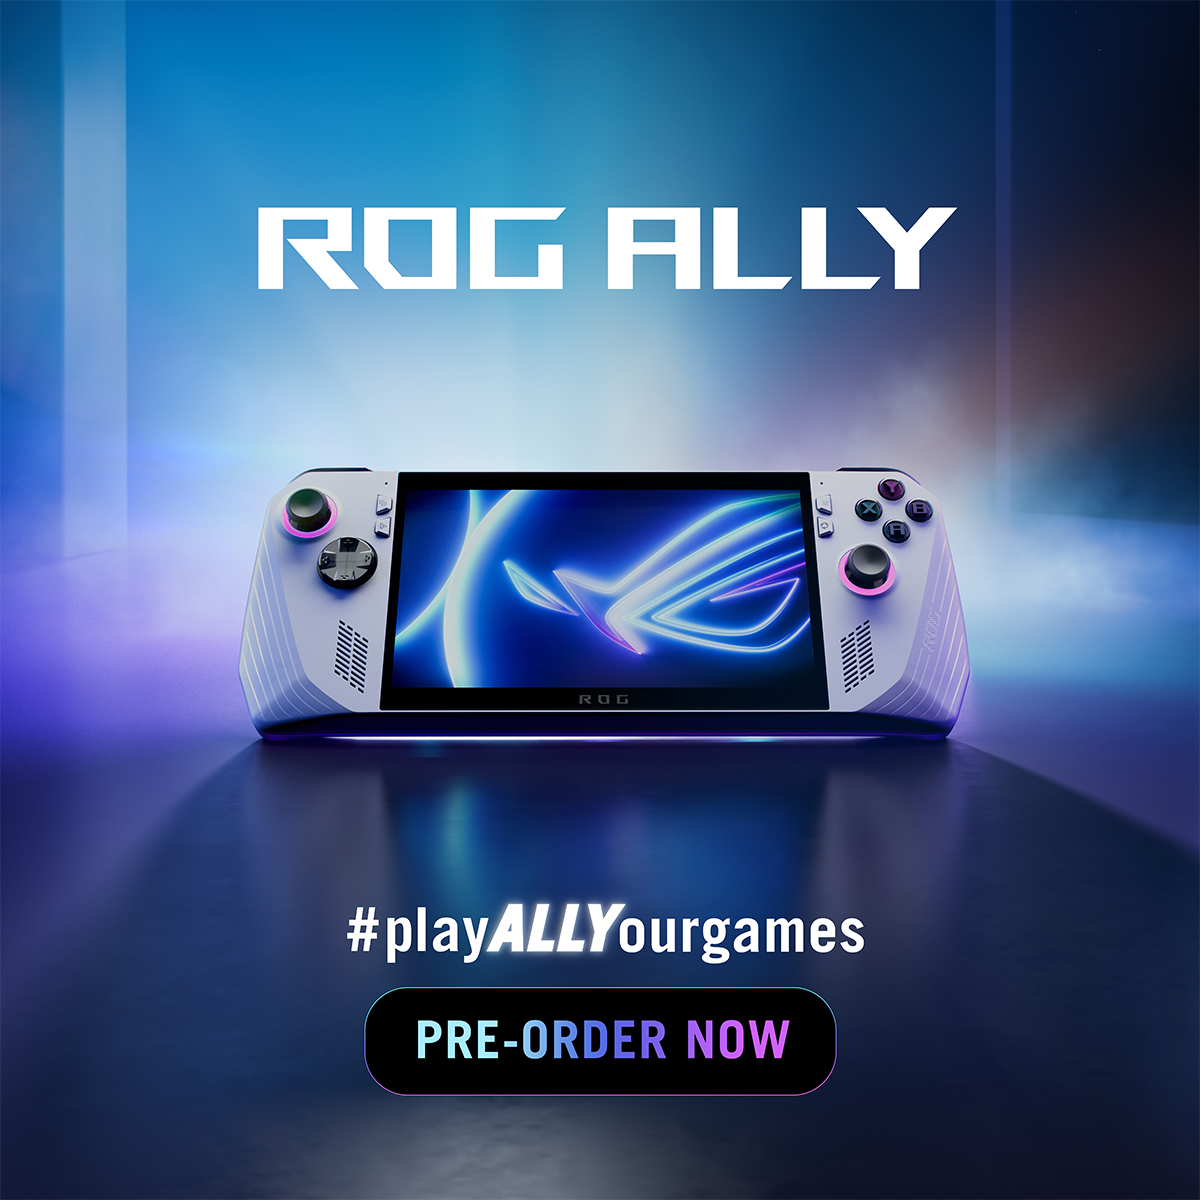 The ROG Ally is now available for pre-oders! US 👉 rog.gg/bestbuy CA 👉 rog.gg/bestbuy.ca UK 👉 rog.gg/ukally Or check out your local rog.asus.com 'Where to buy' page! #ROGALLY #playALLYourgames